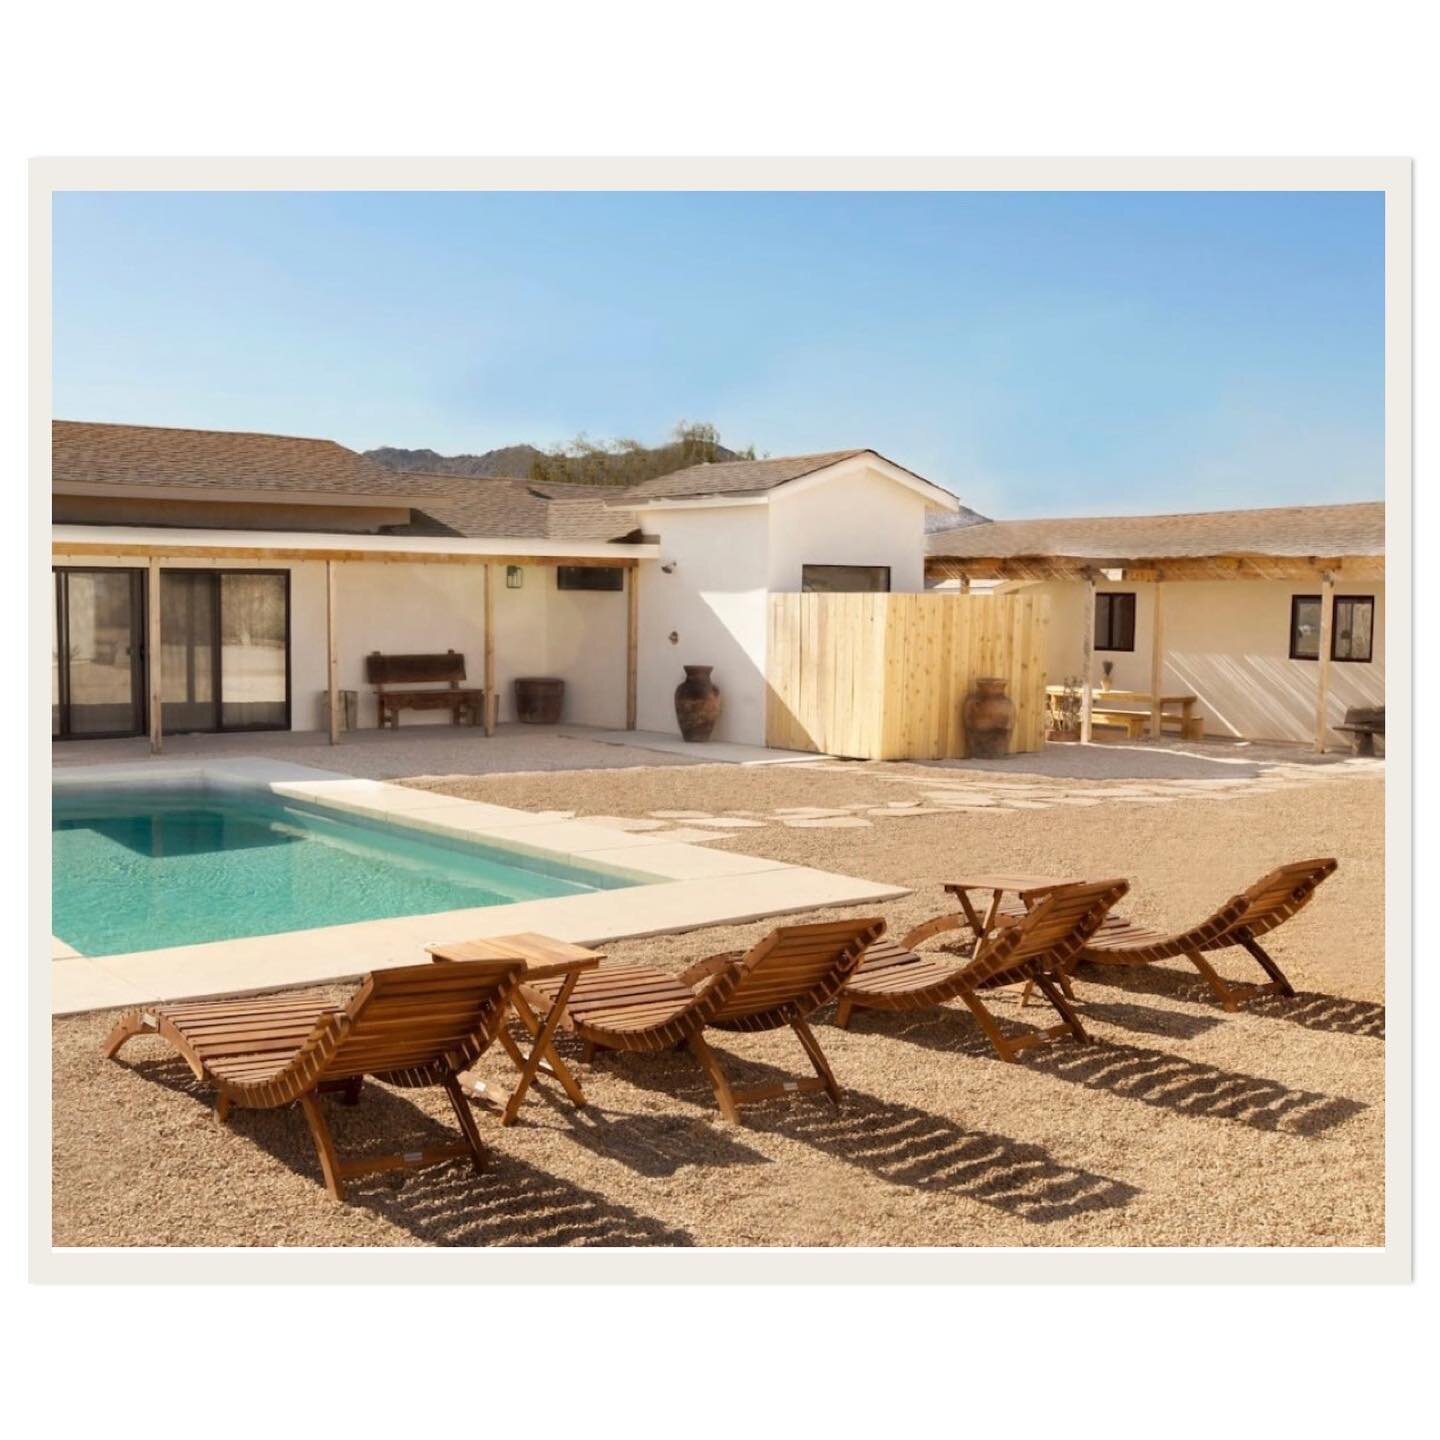 Our sister property - @the_nabu_villa - Joshua Tree. This exquisite property welcomes you to celebrate setting and honor the serene. Nestled 15 minutes away from the Joshua Tree National Park entrance, Nabu is an oasis in the desert - centered around